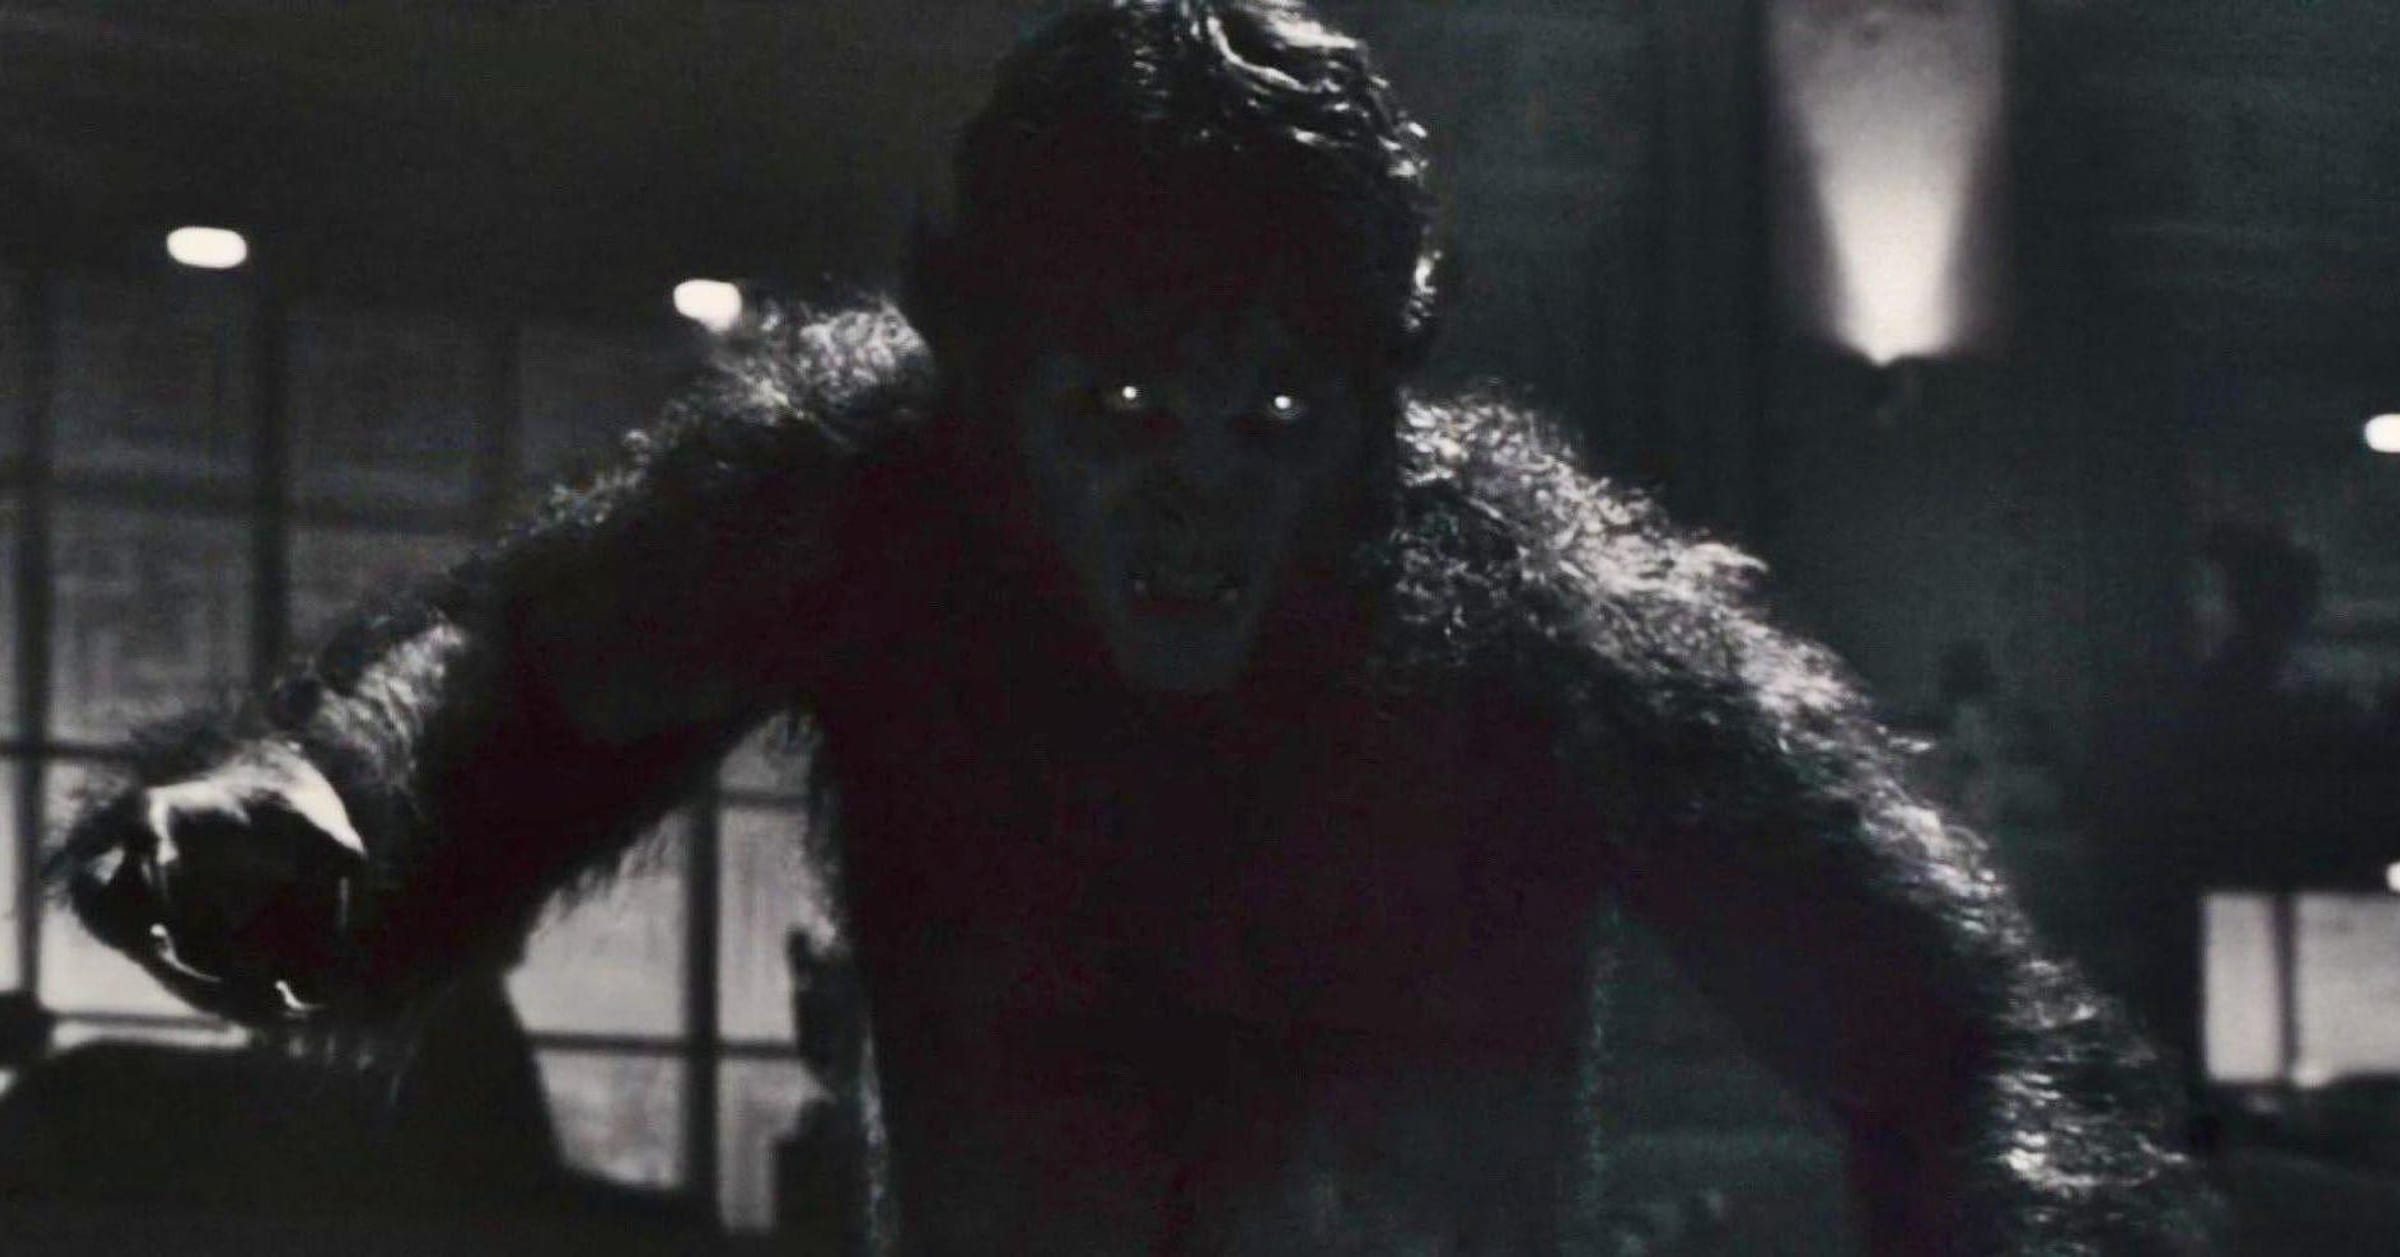 Every Monster Made MCU Canon In Werewolf By Night